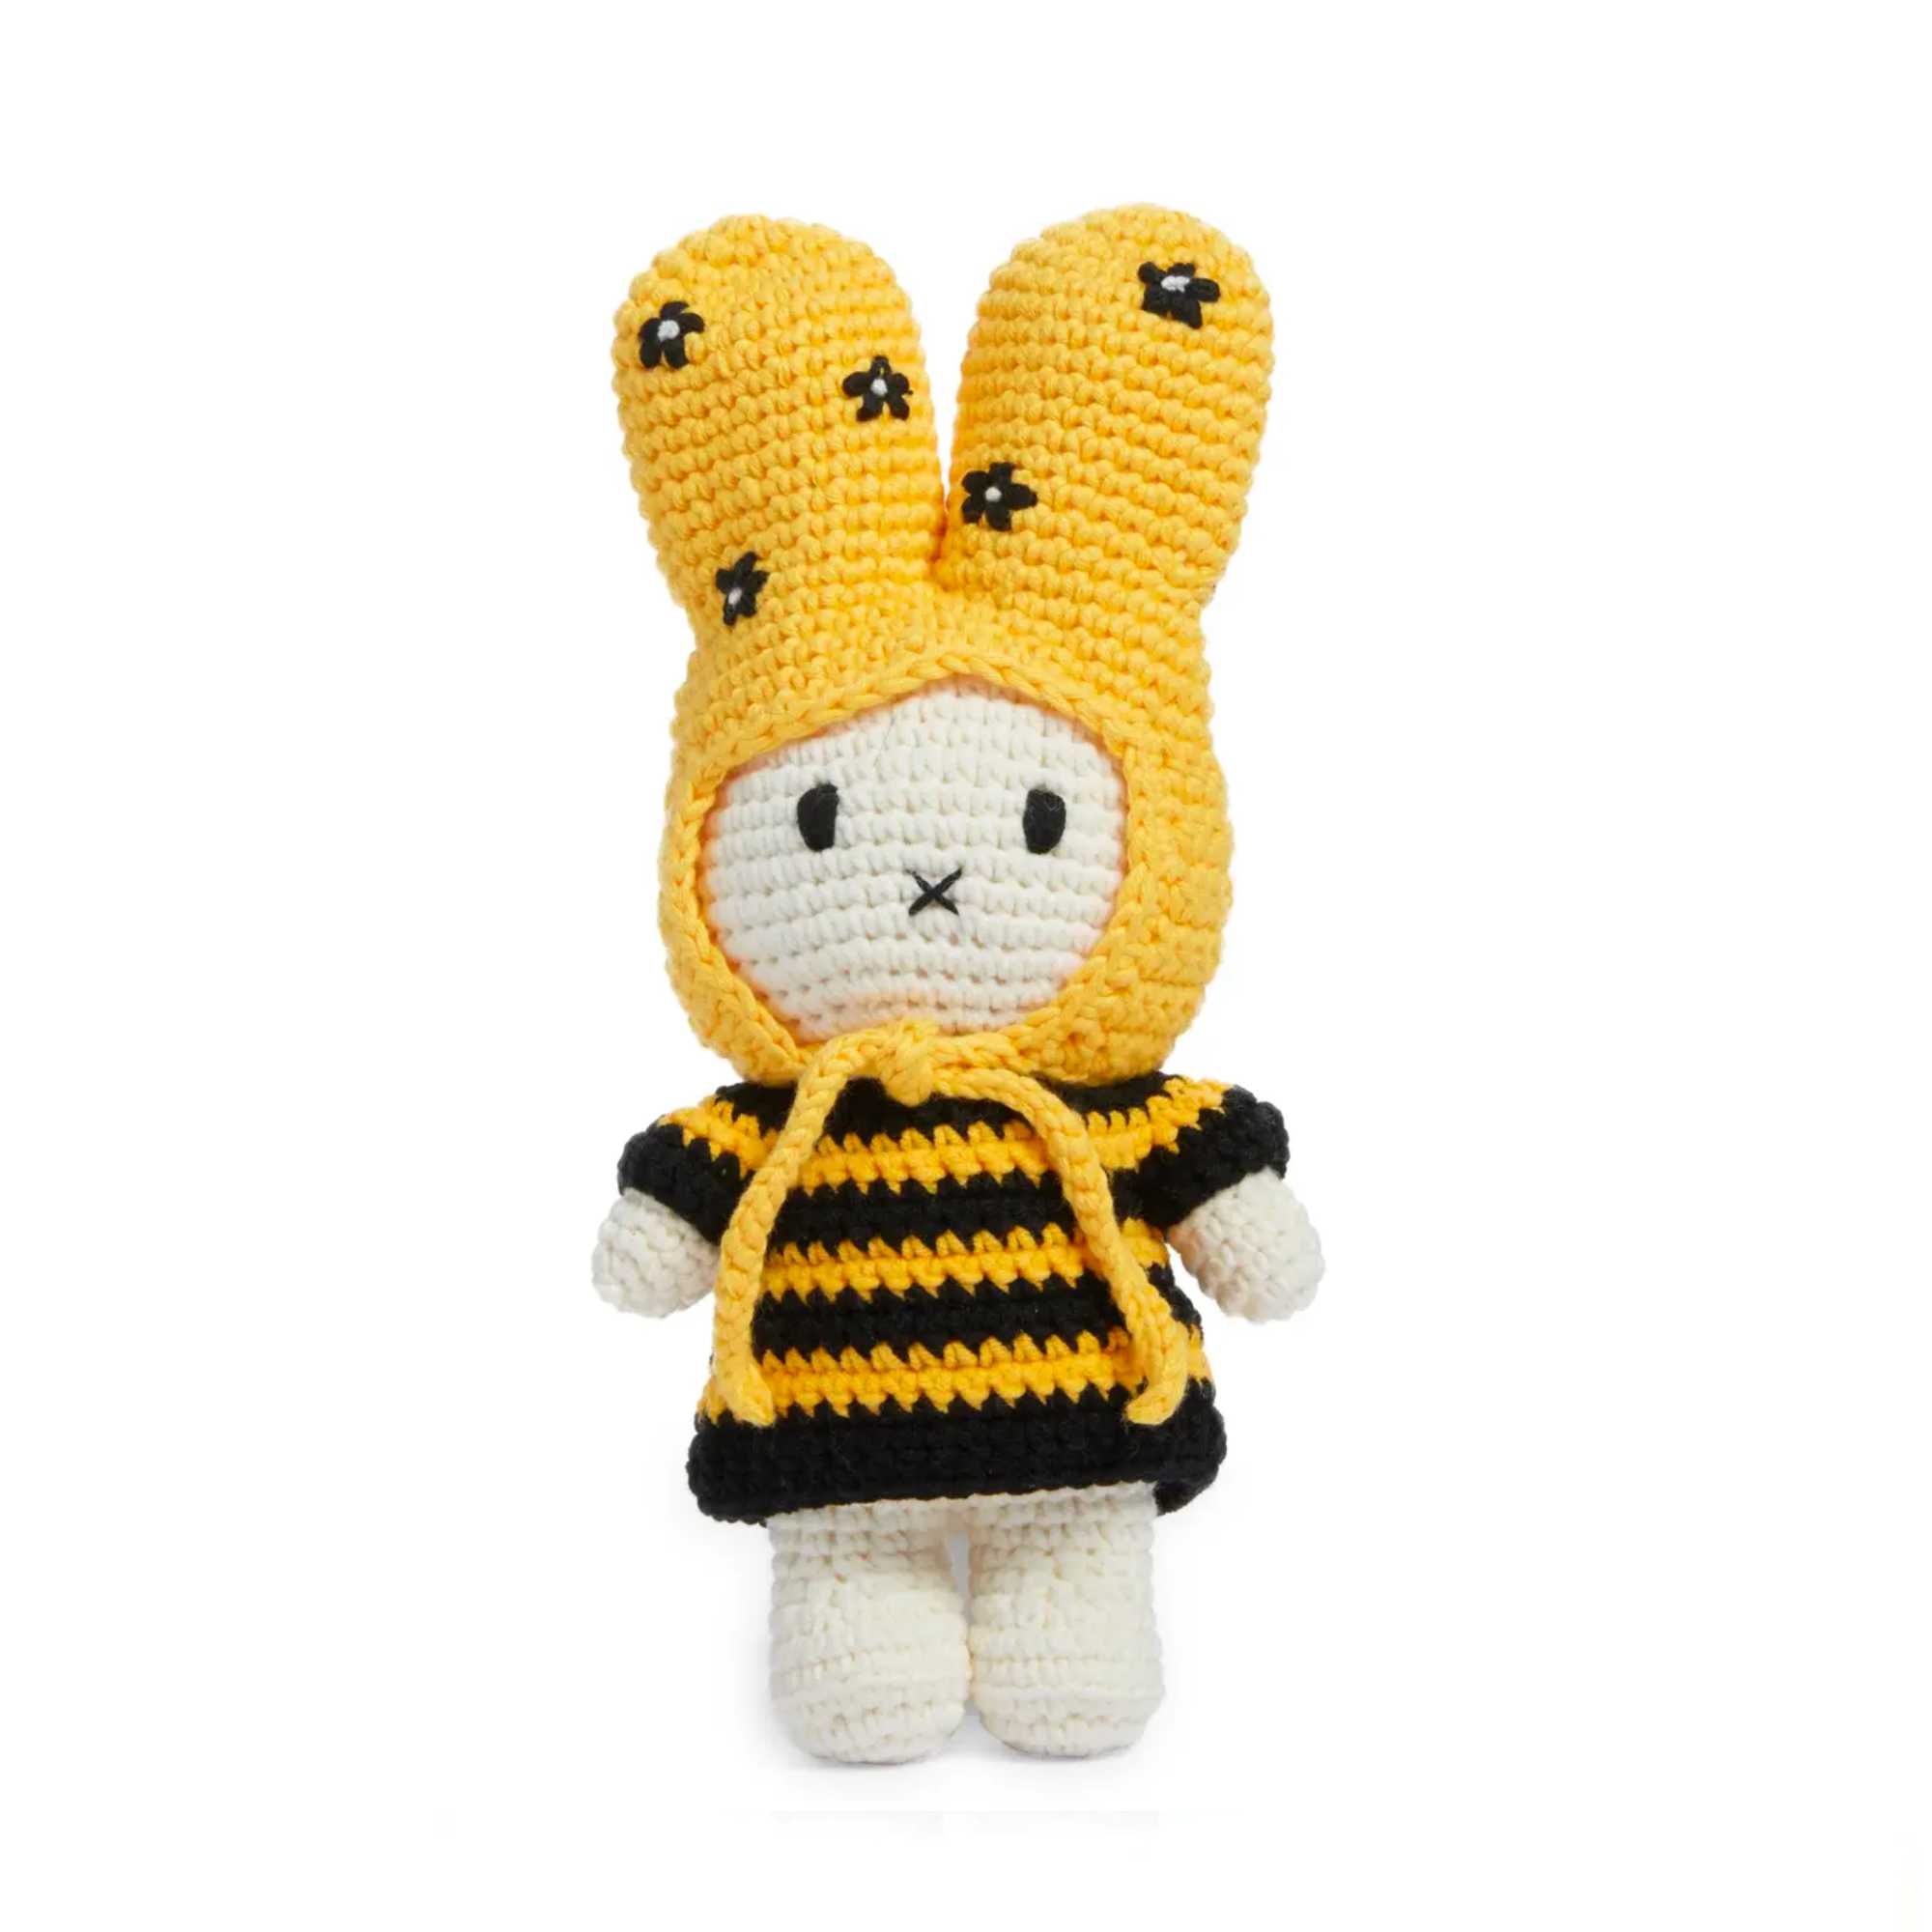 Just Dutch handmade Miffy, bumble bee dress with hat (25cm)